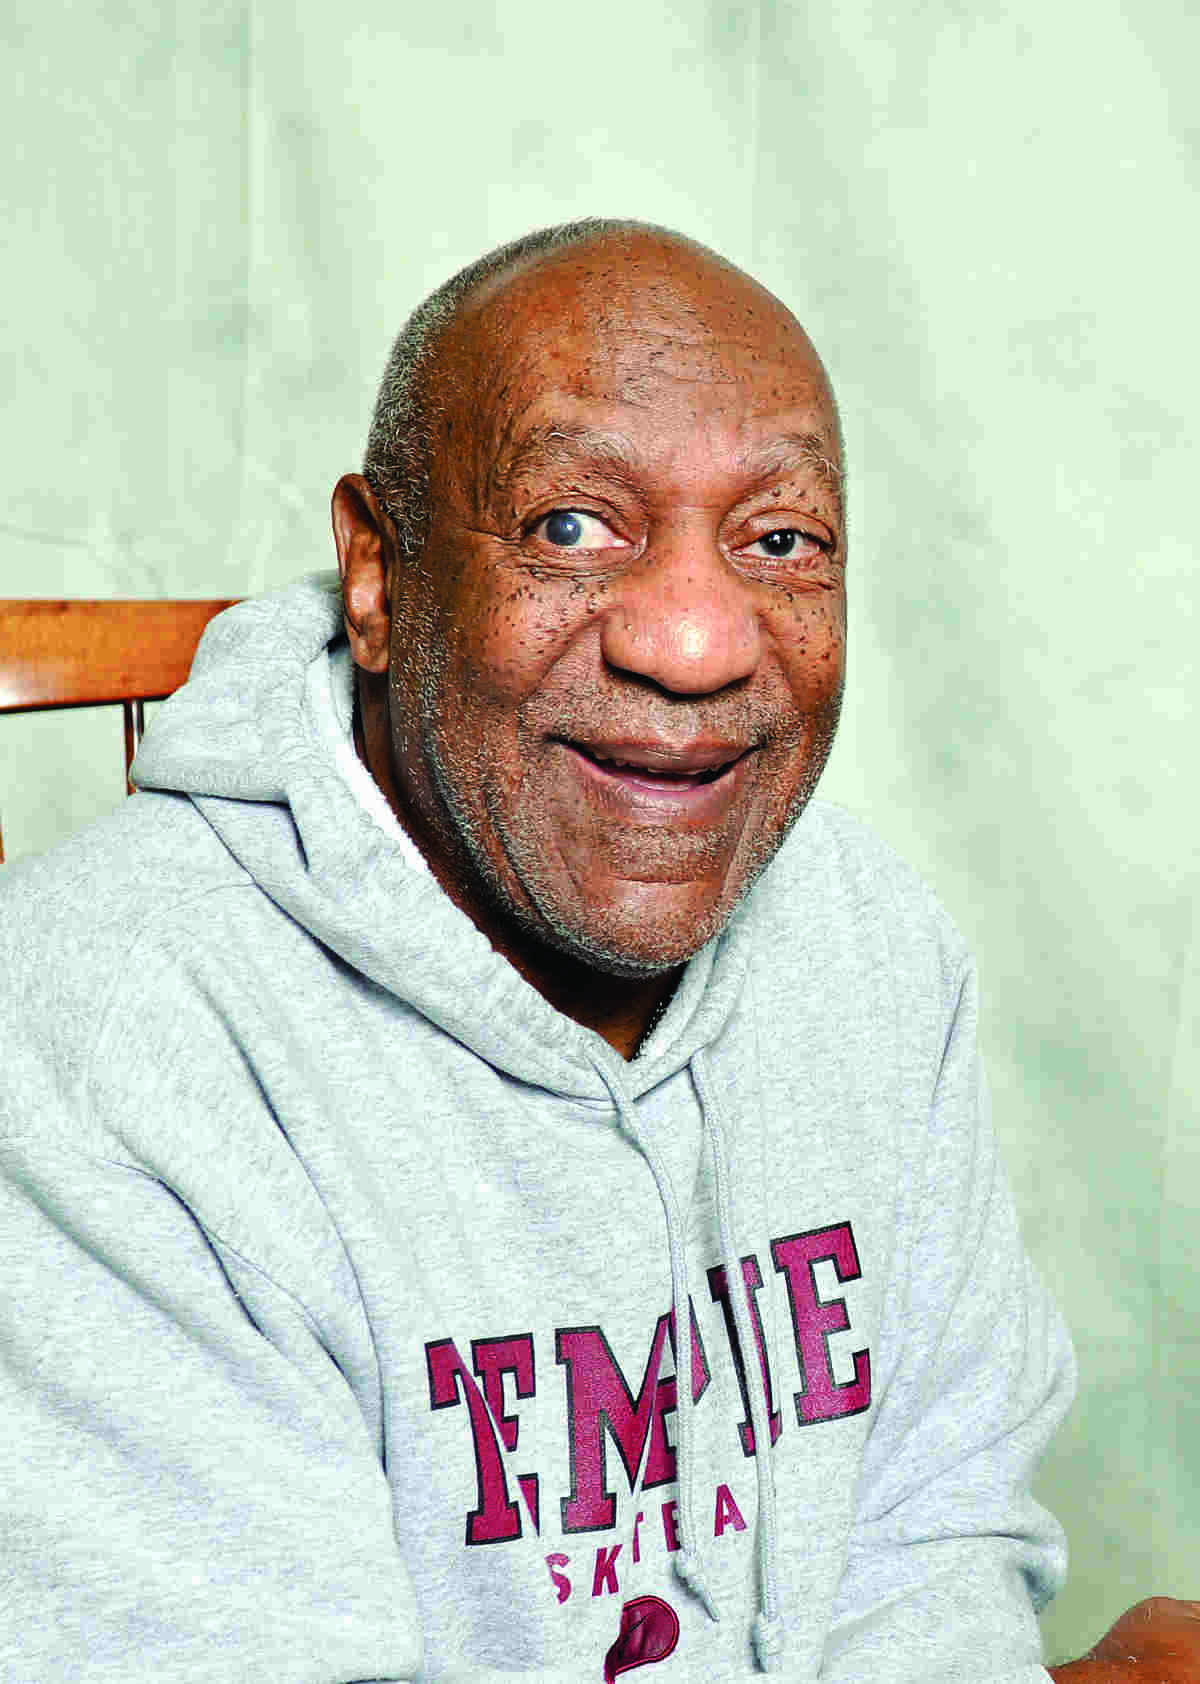 High court will not review decision freeing Cosby from prison